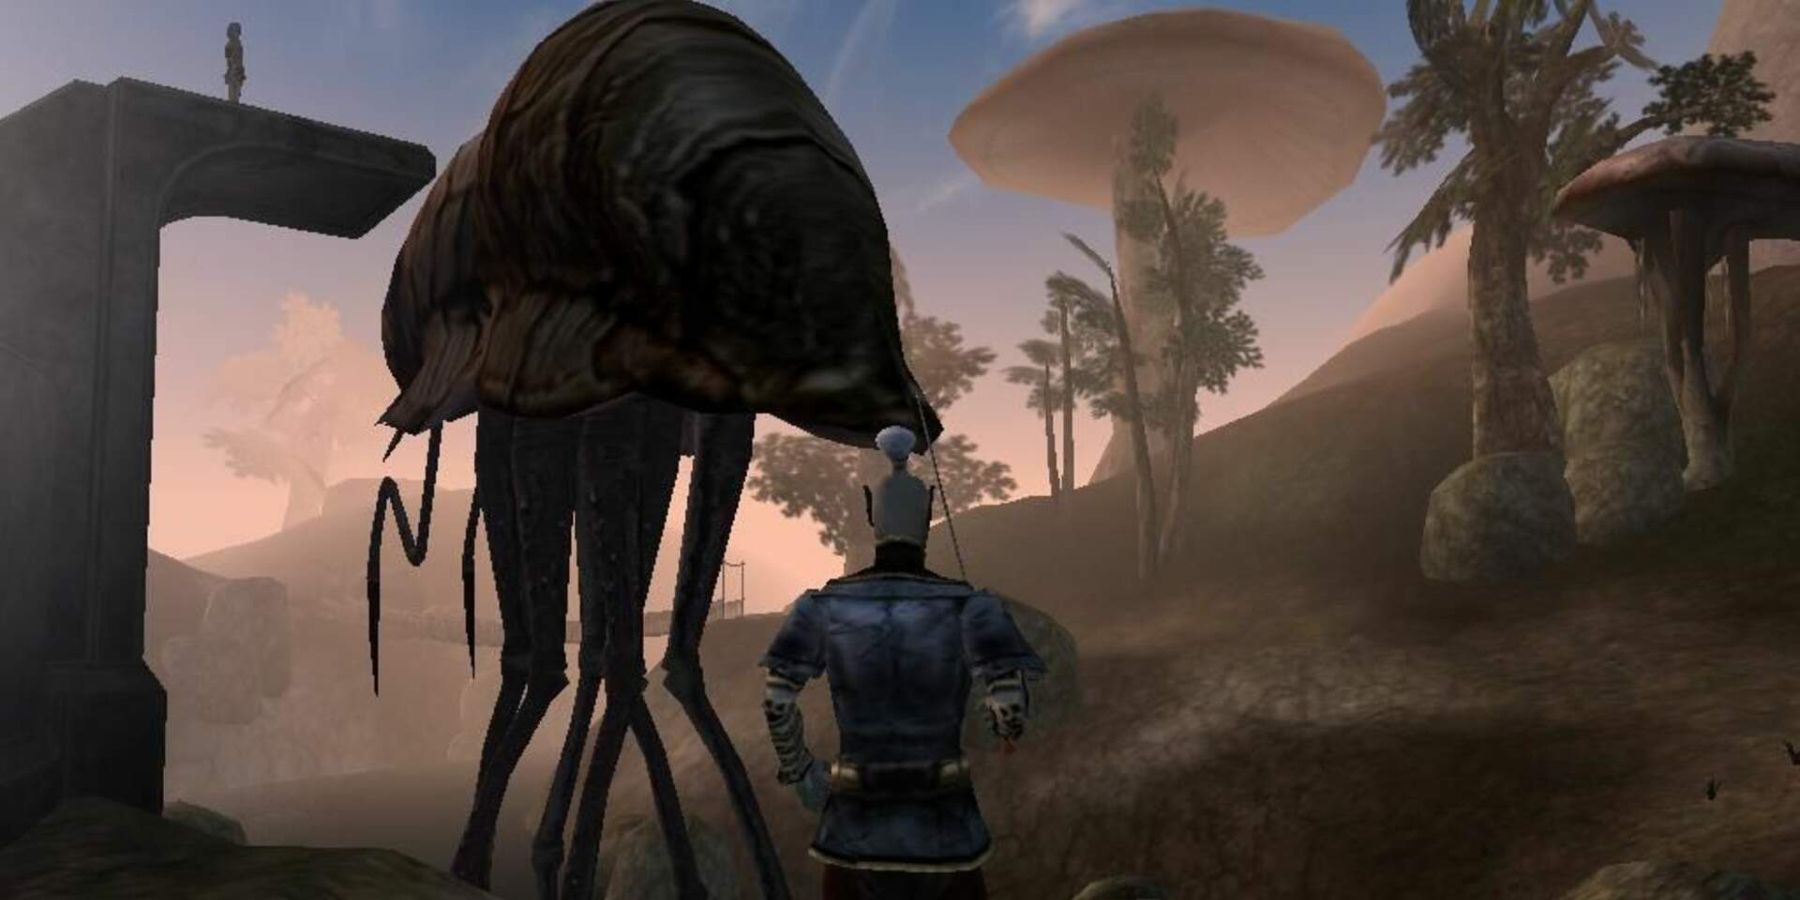 Image from Morrowind showing a Dark Elf stood next to a Silt Strider.